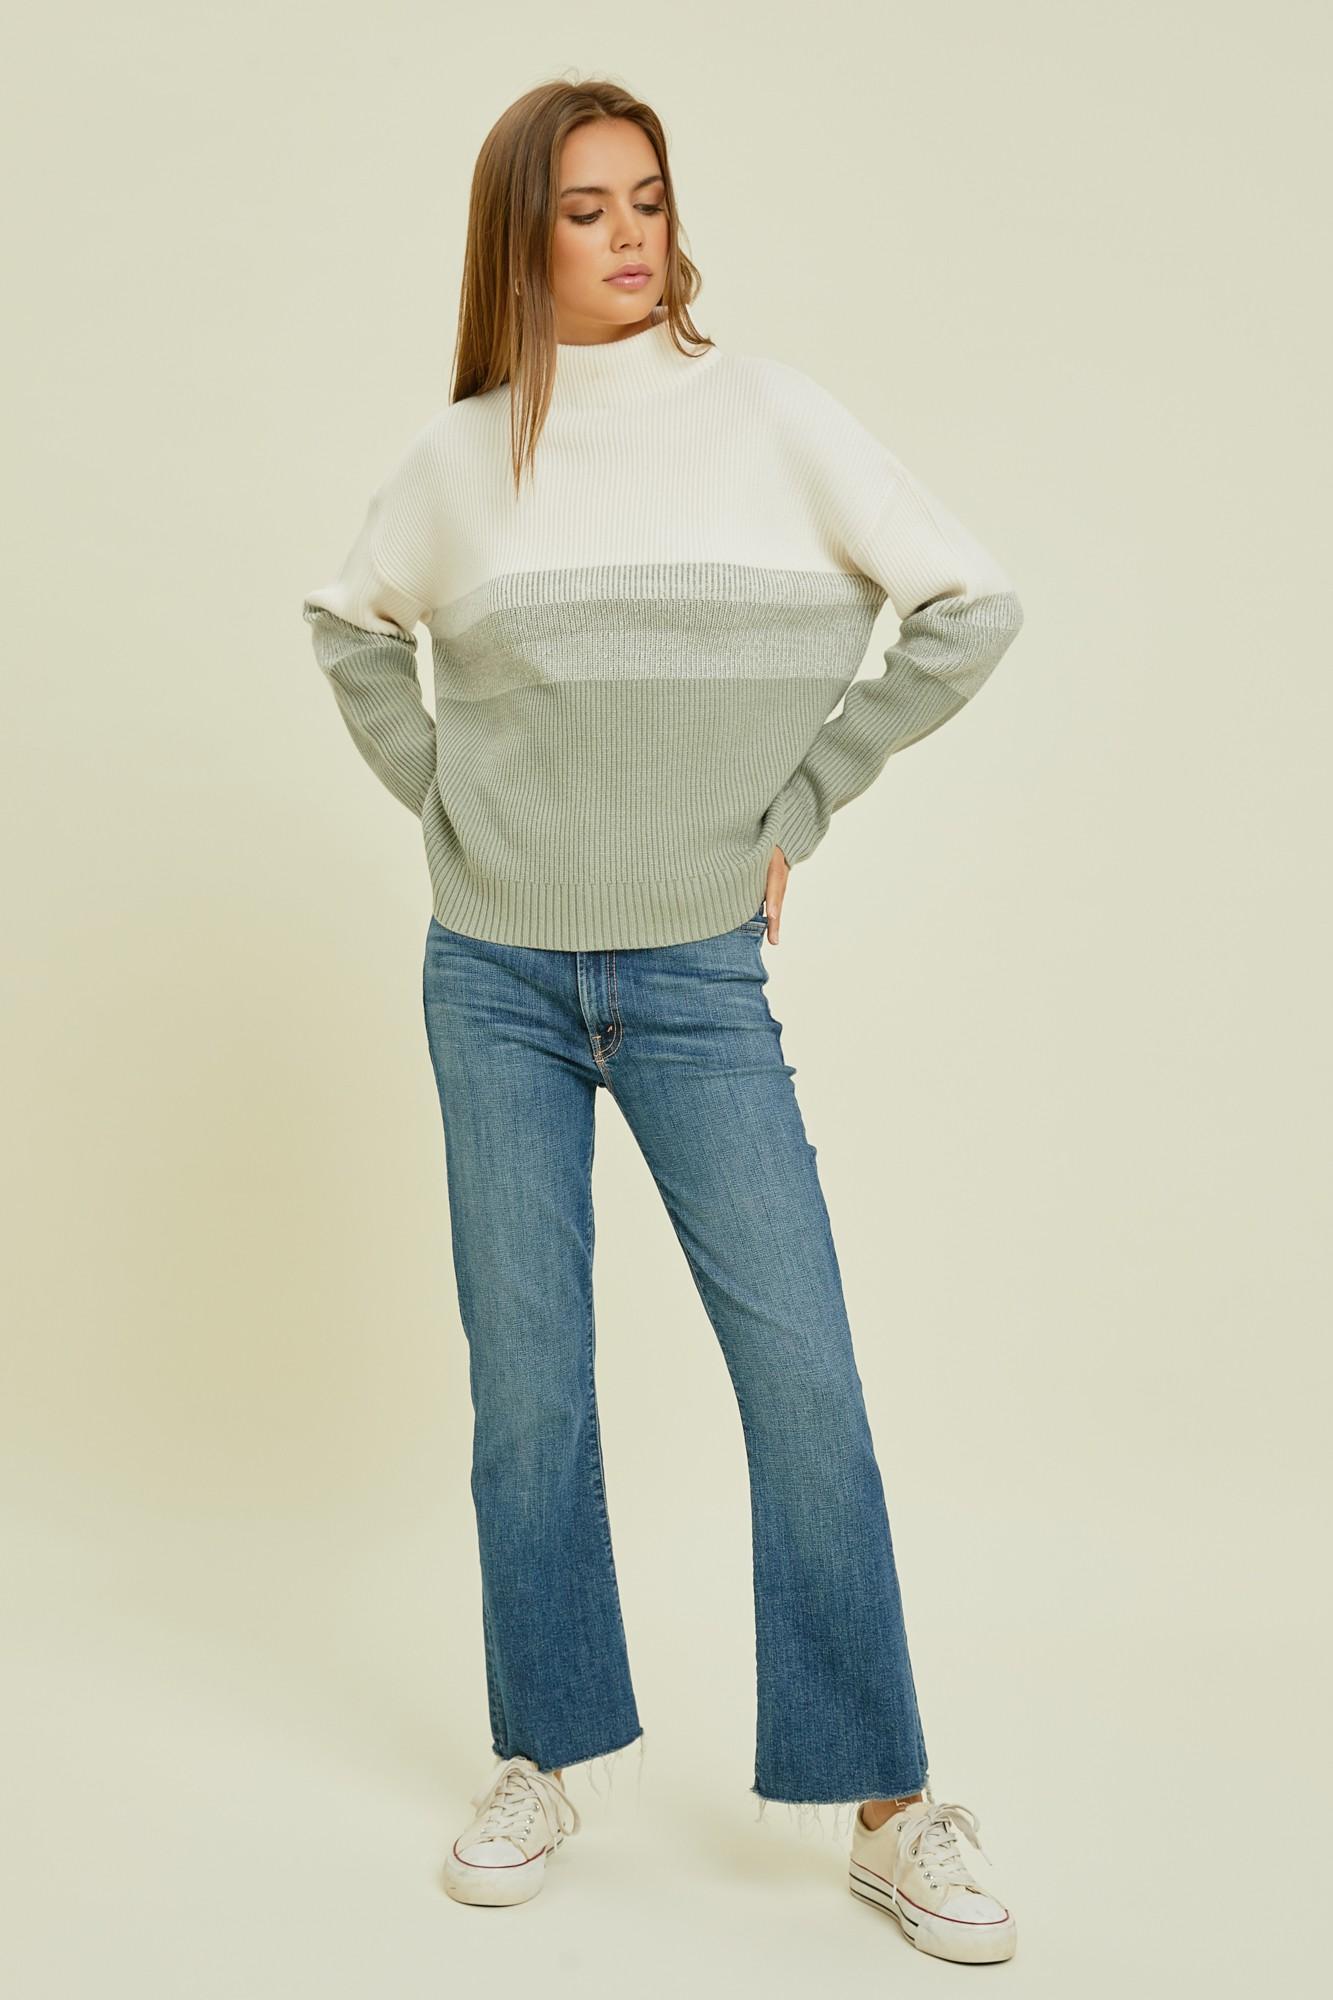 The Danny Knit Turtleneck Sweater